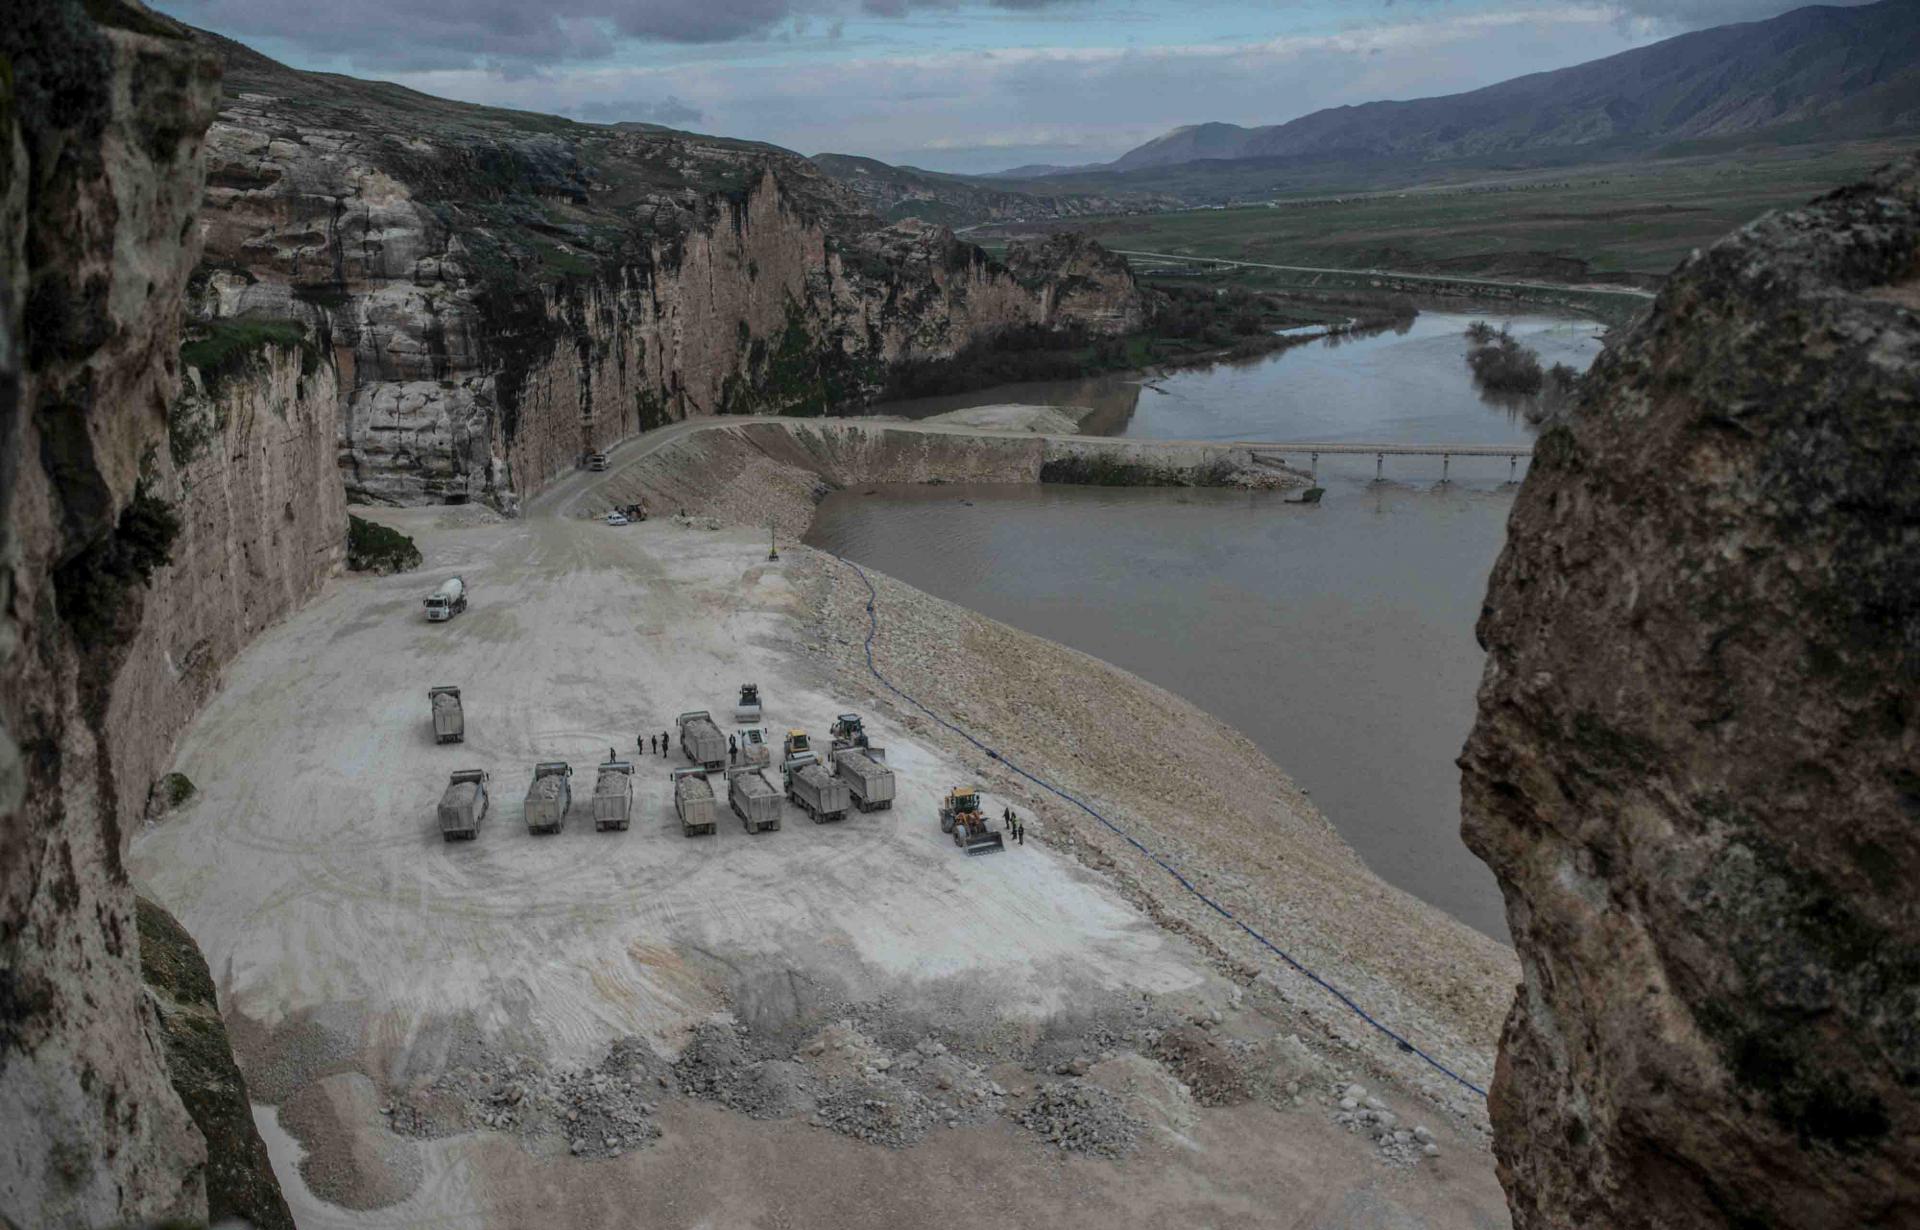 Trucks are seen on the banks of the Tigris River near Hasankeyf, last December